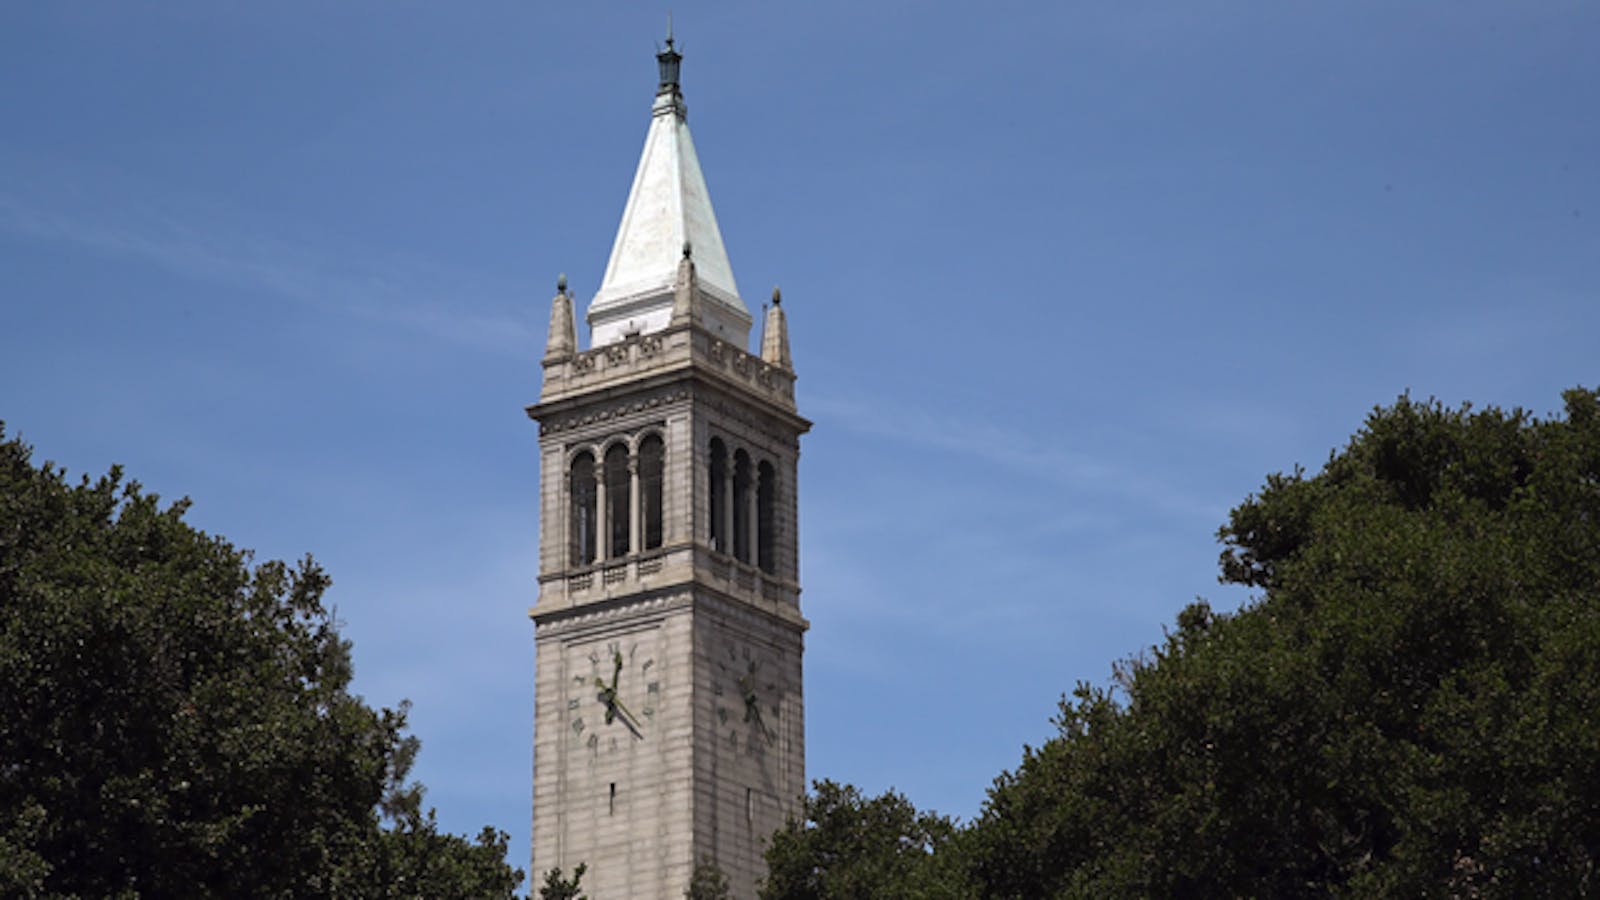 Sather Tower, on the UC Berkeley campus. Photo by AP.